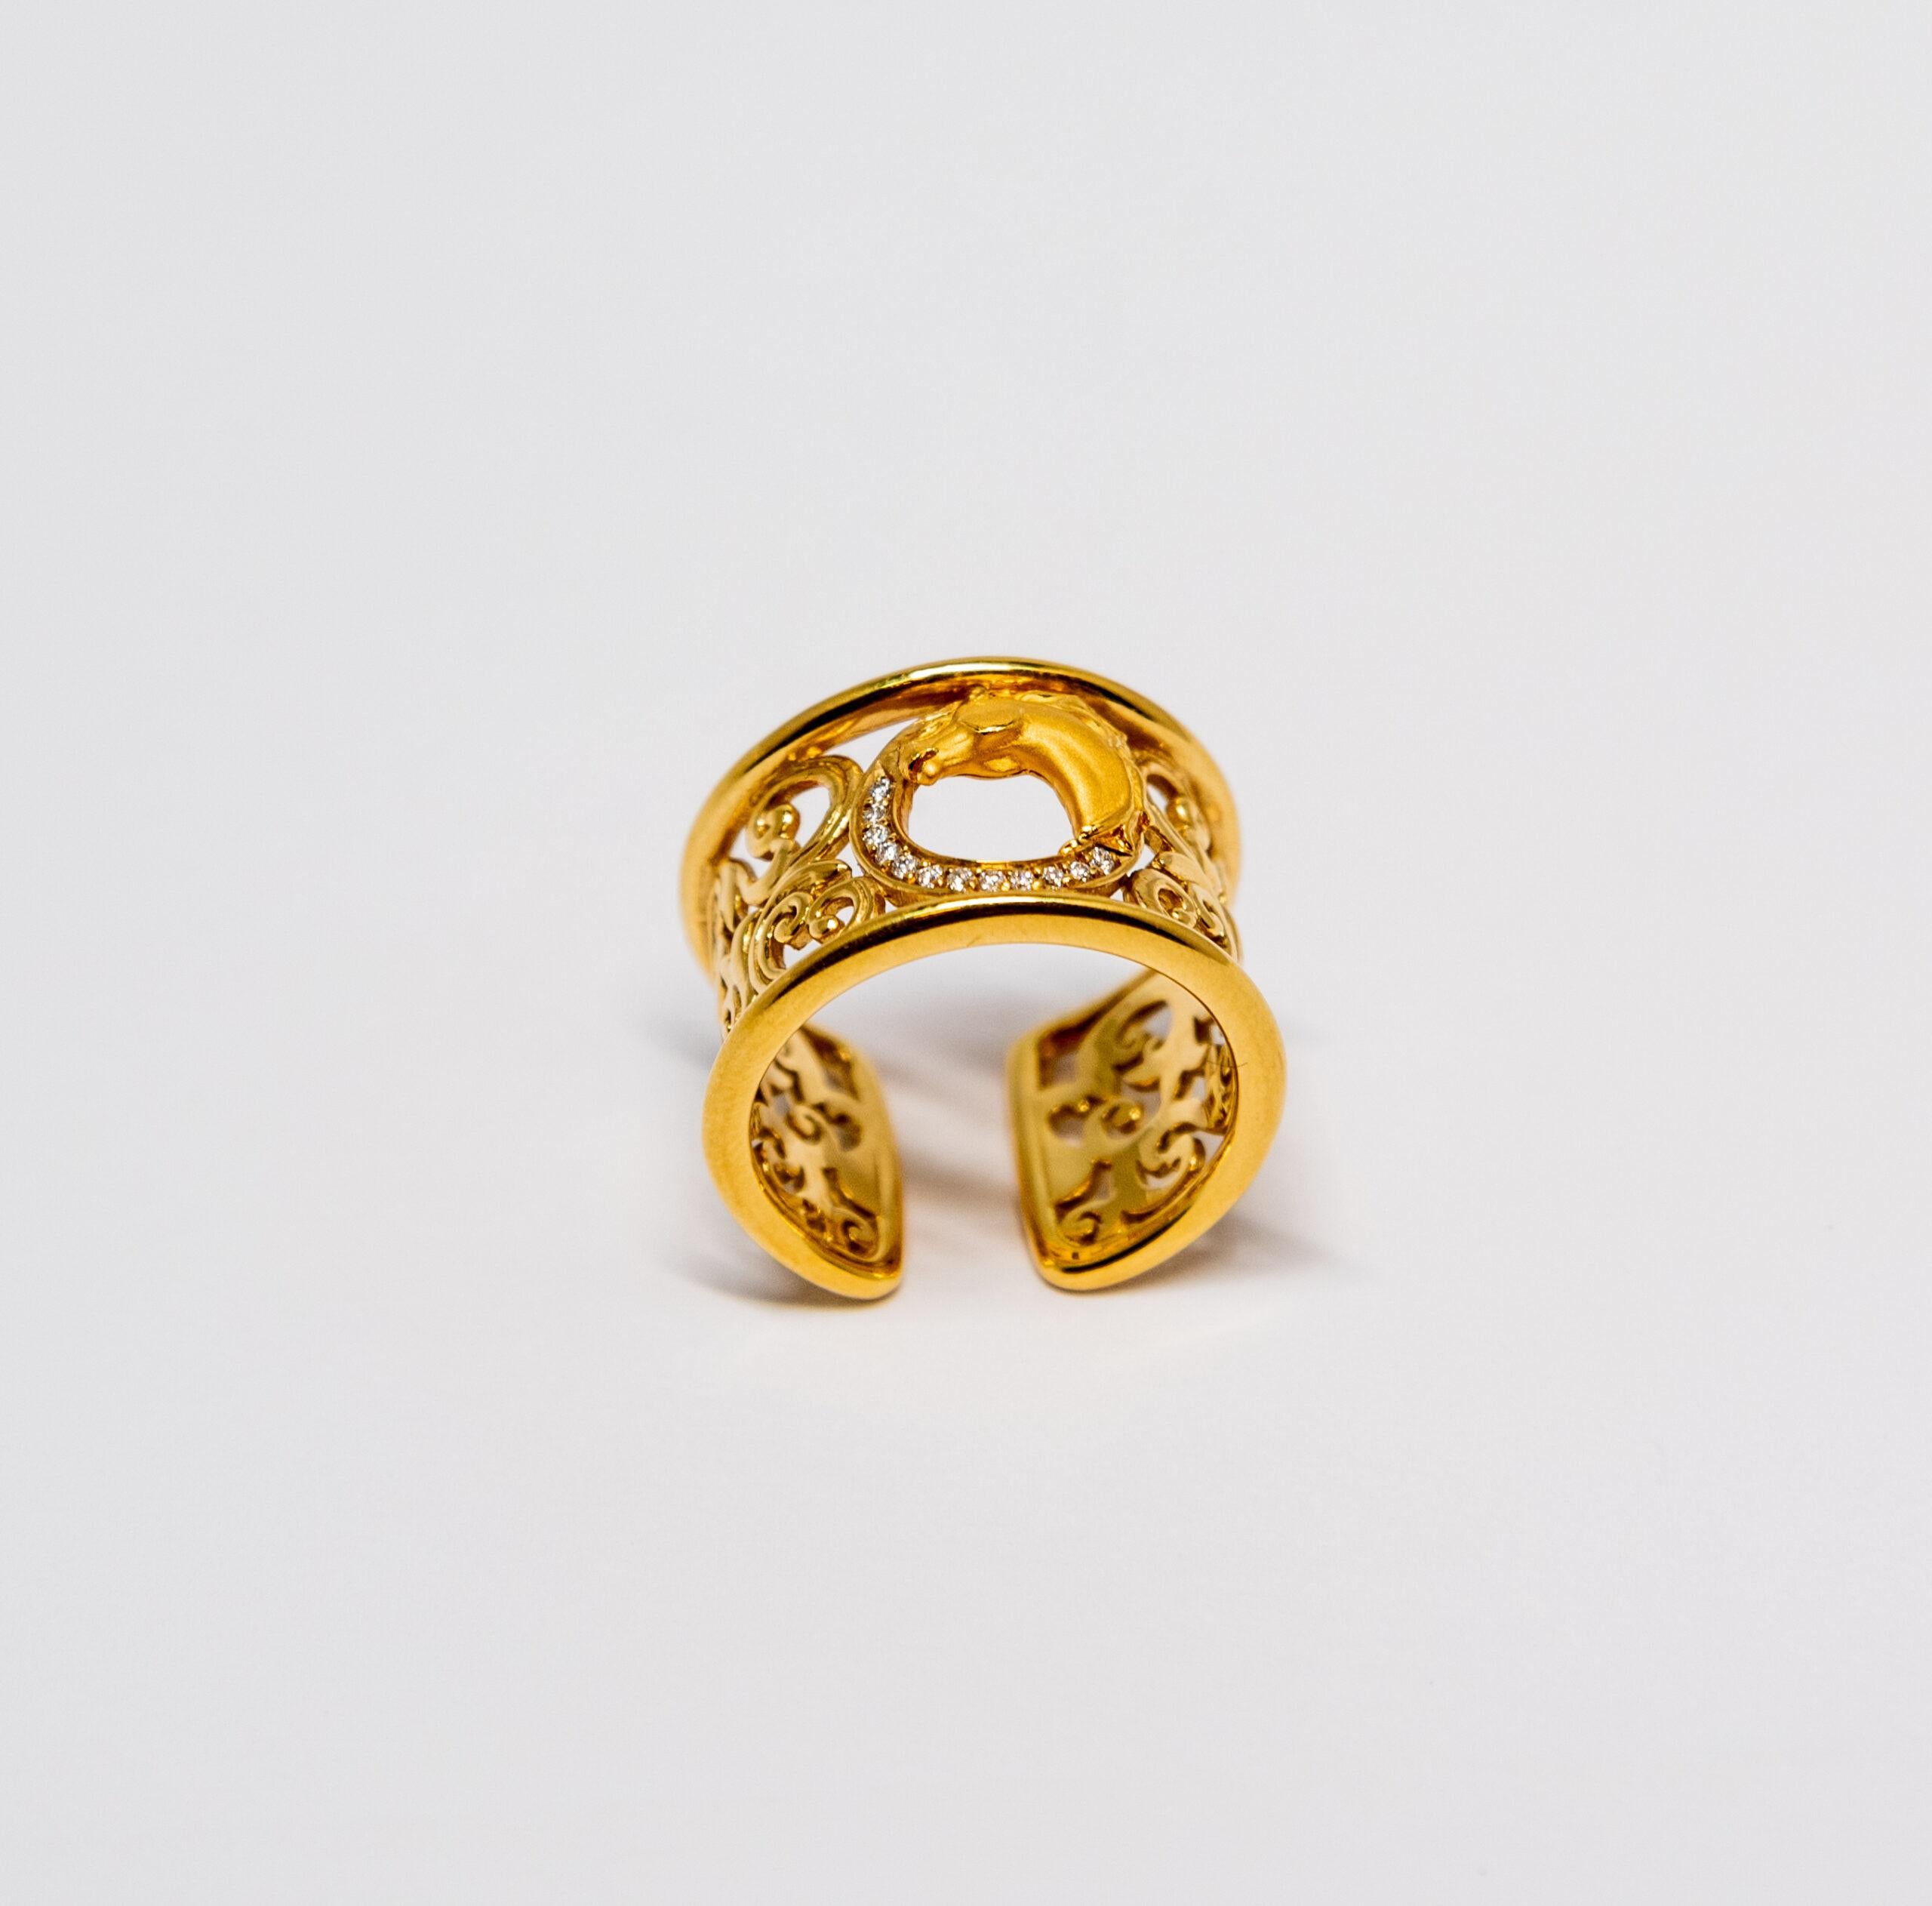 This ring is made of 18K Yellow Gold. The handmade horse-shaped figure in the middle with 12 diamonds.

The Size – 53.5 (6.5 US)